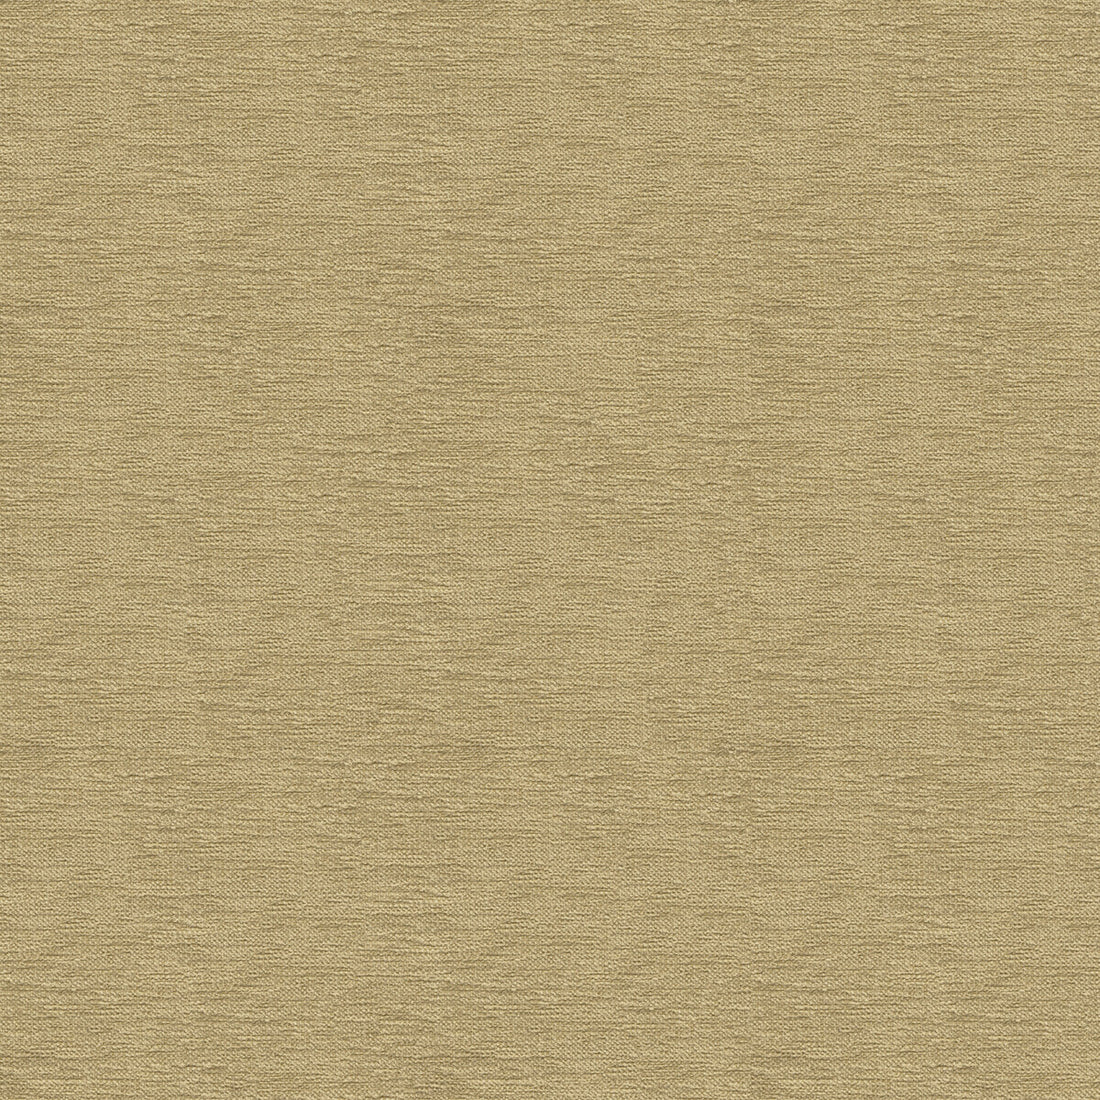 Kravet Contract fabric in 33876-1616 color - pattern 33876.1616.0 - by Kravet Contract in the Crypton Incase collection